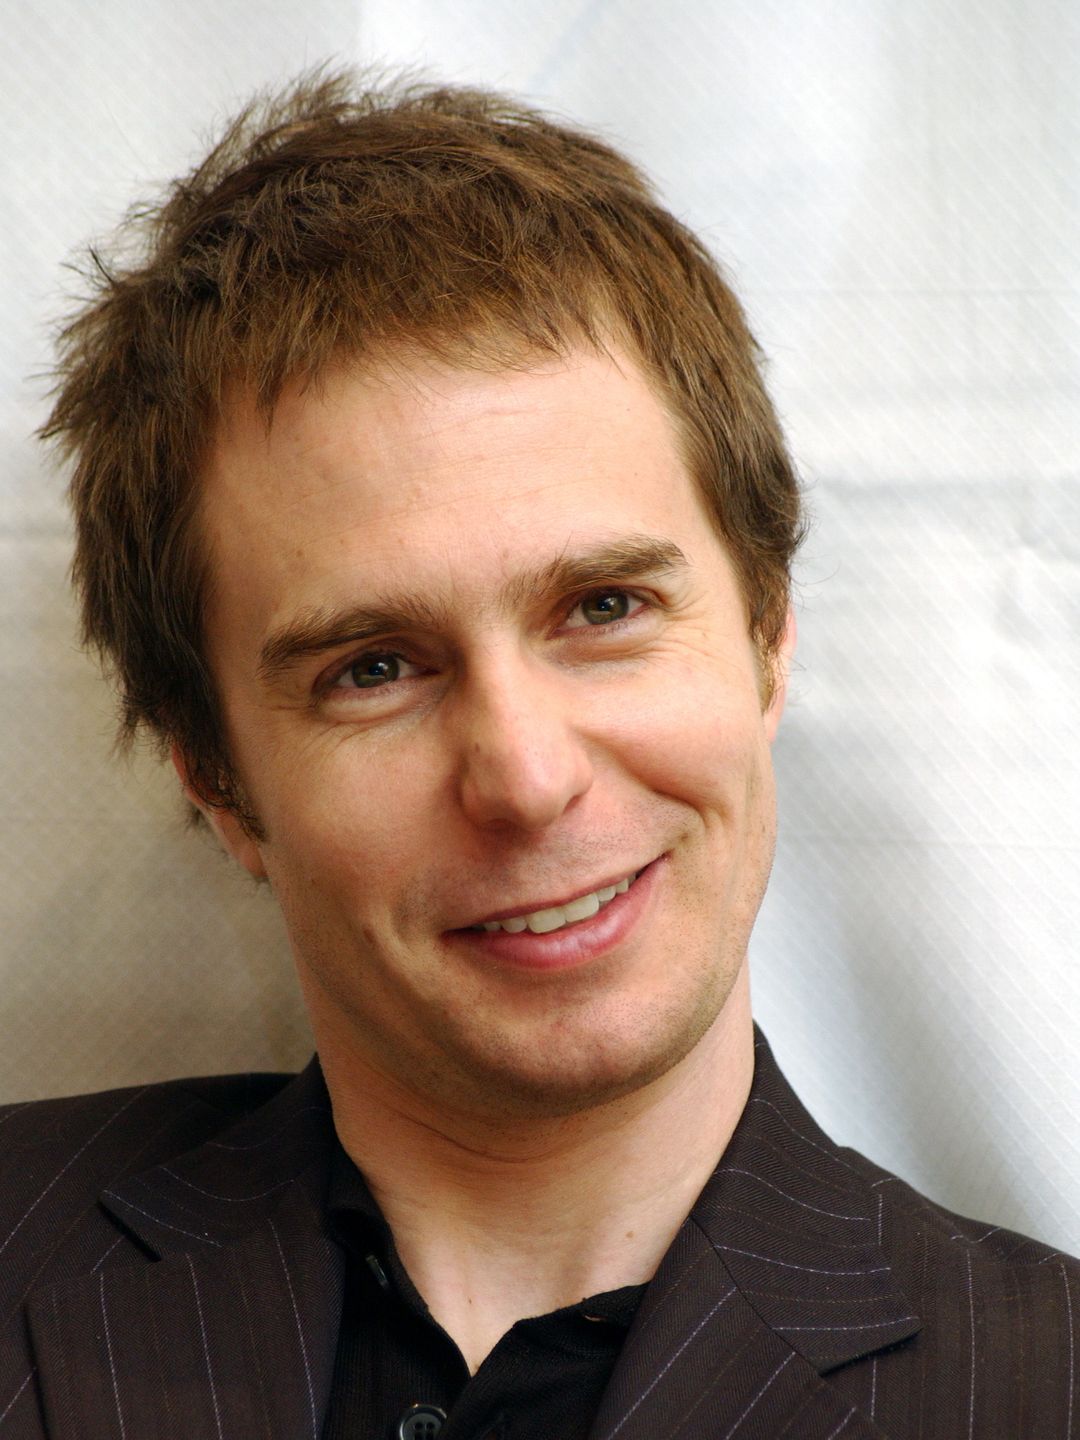 Sam Rockwell early life